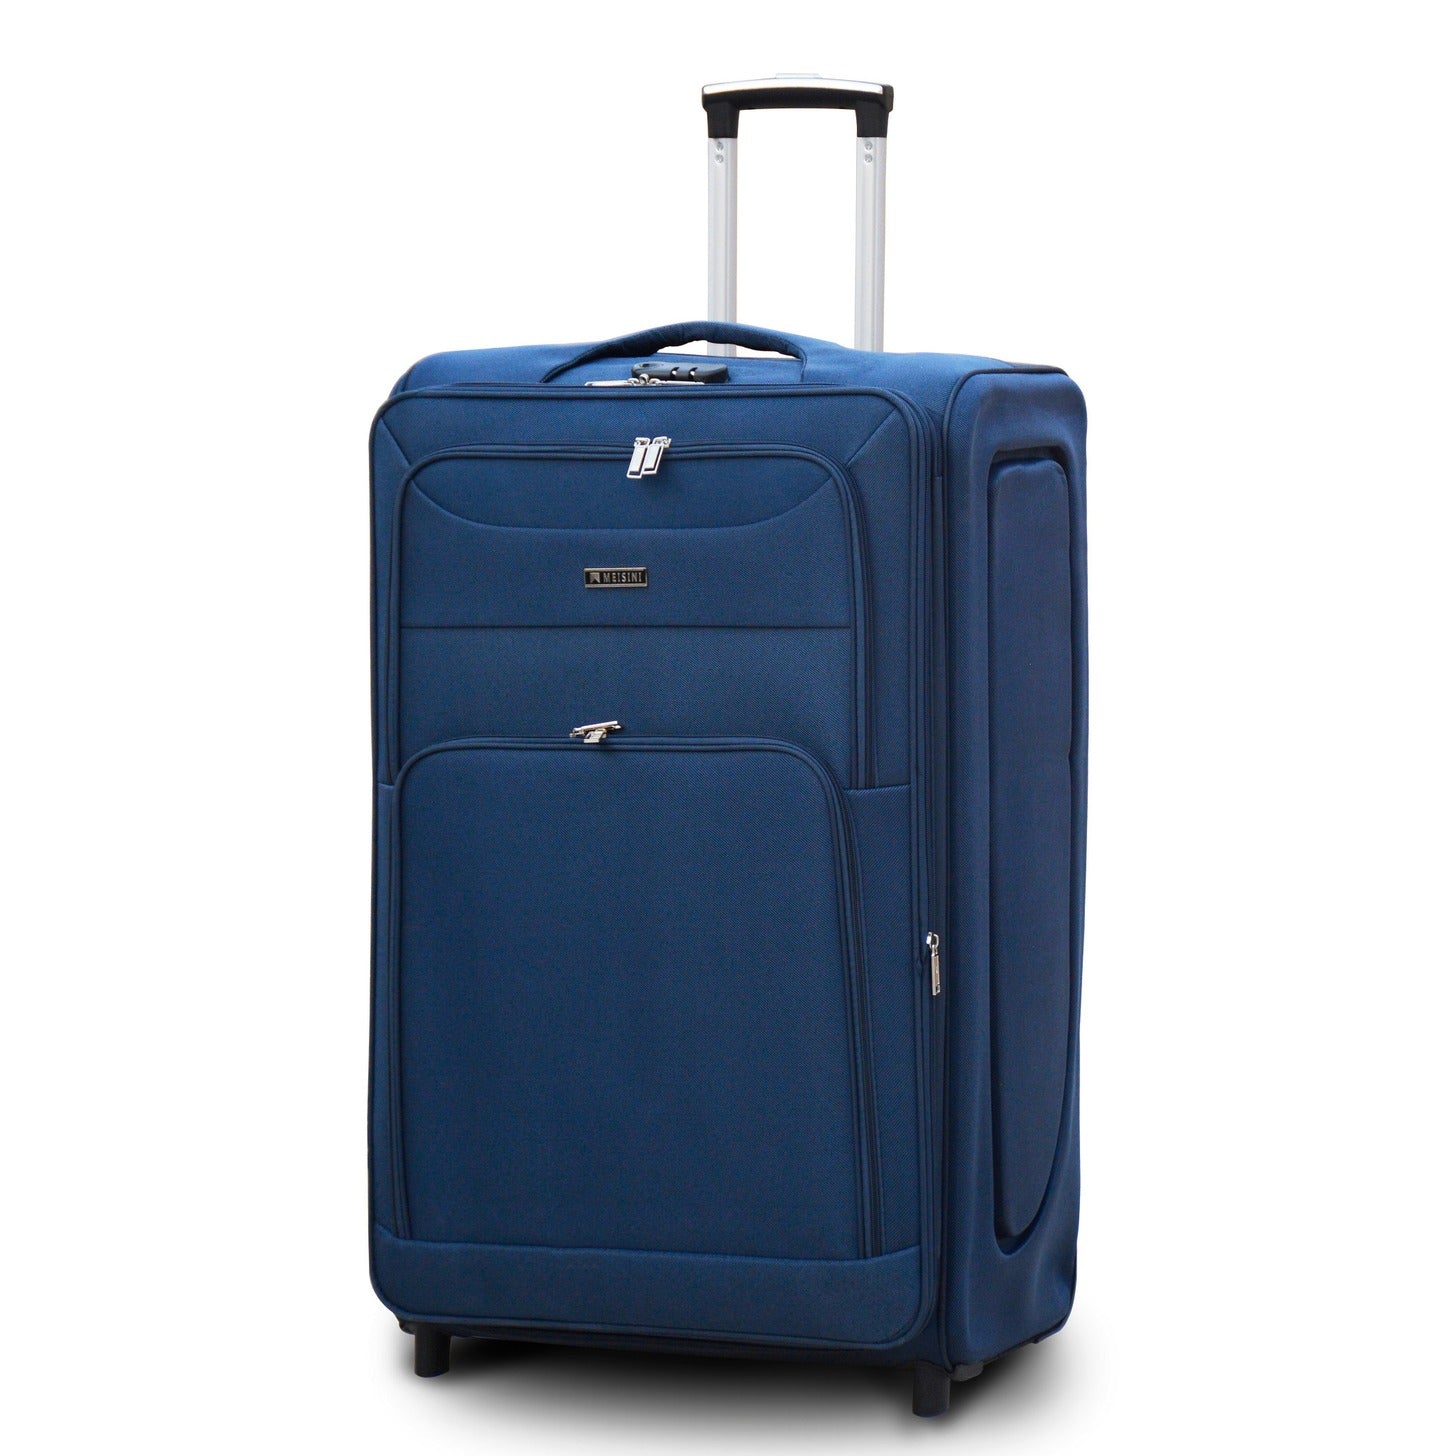 32" Blue Colour LP 2 Wheel 0161 Luggage Lightweight Soft Material Trolley Bag